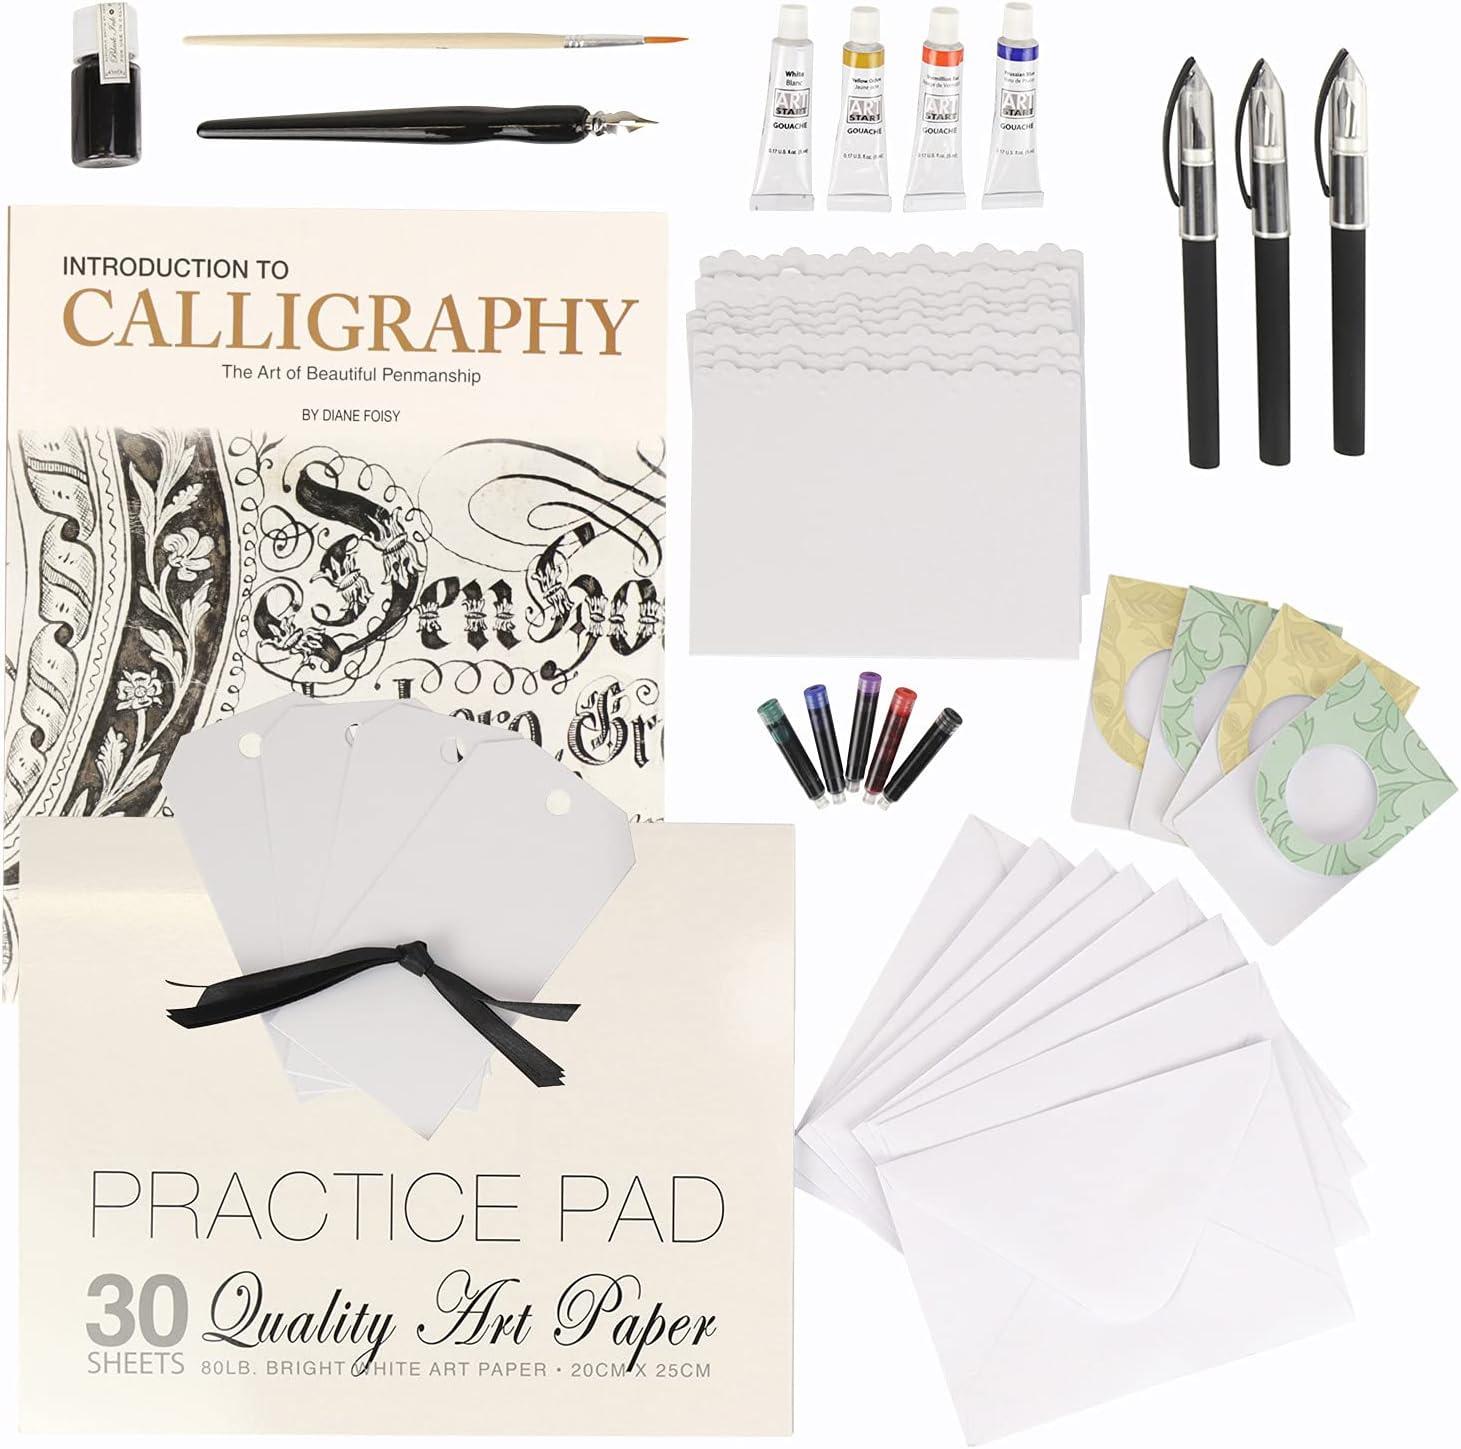  SpiceBox Adult Art Craft & Hobby Kits Art Studio Calligraphy  with 5 Classic Projects Calligraphy Set for Beginners, Calligraphy Art Kit  for Adults : Arts, Crafts & Sewing